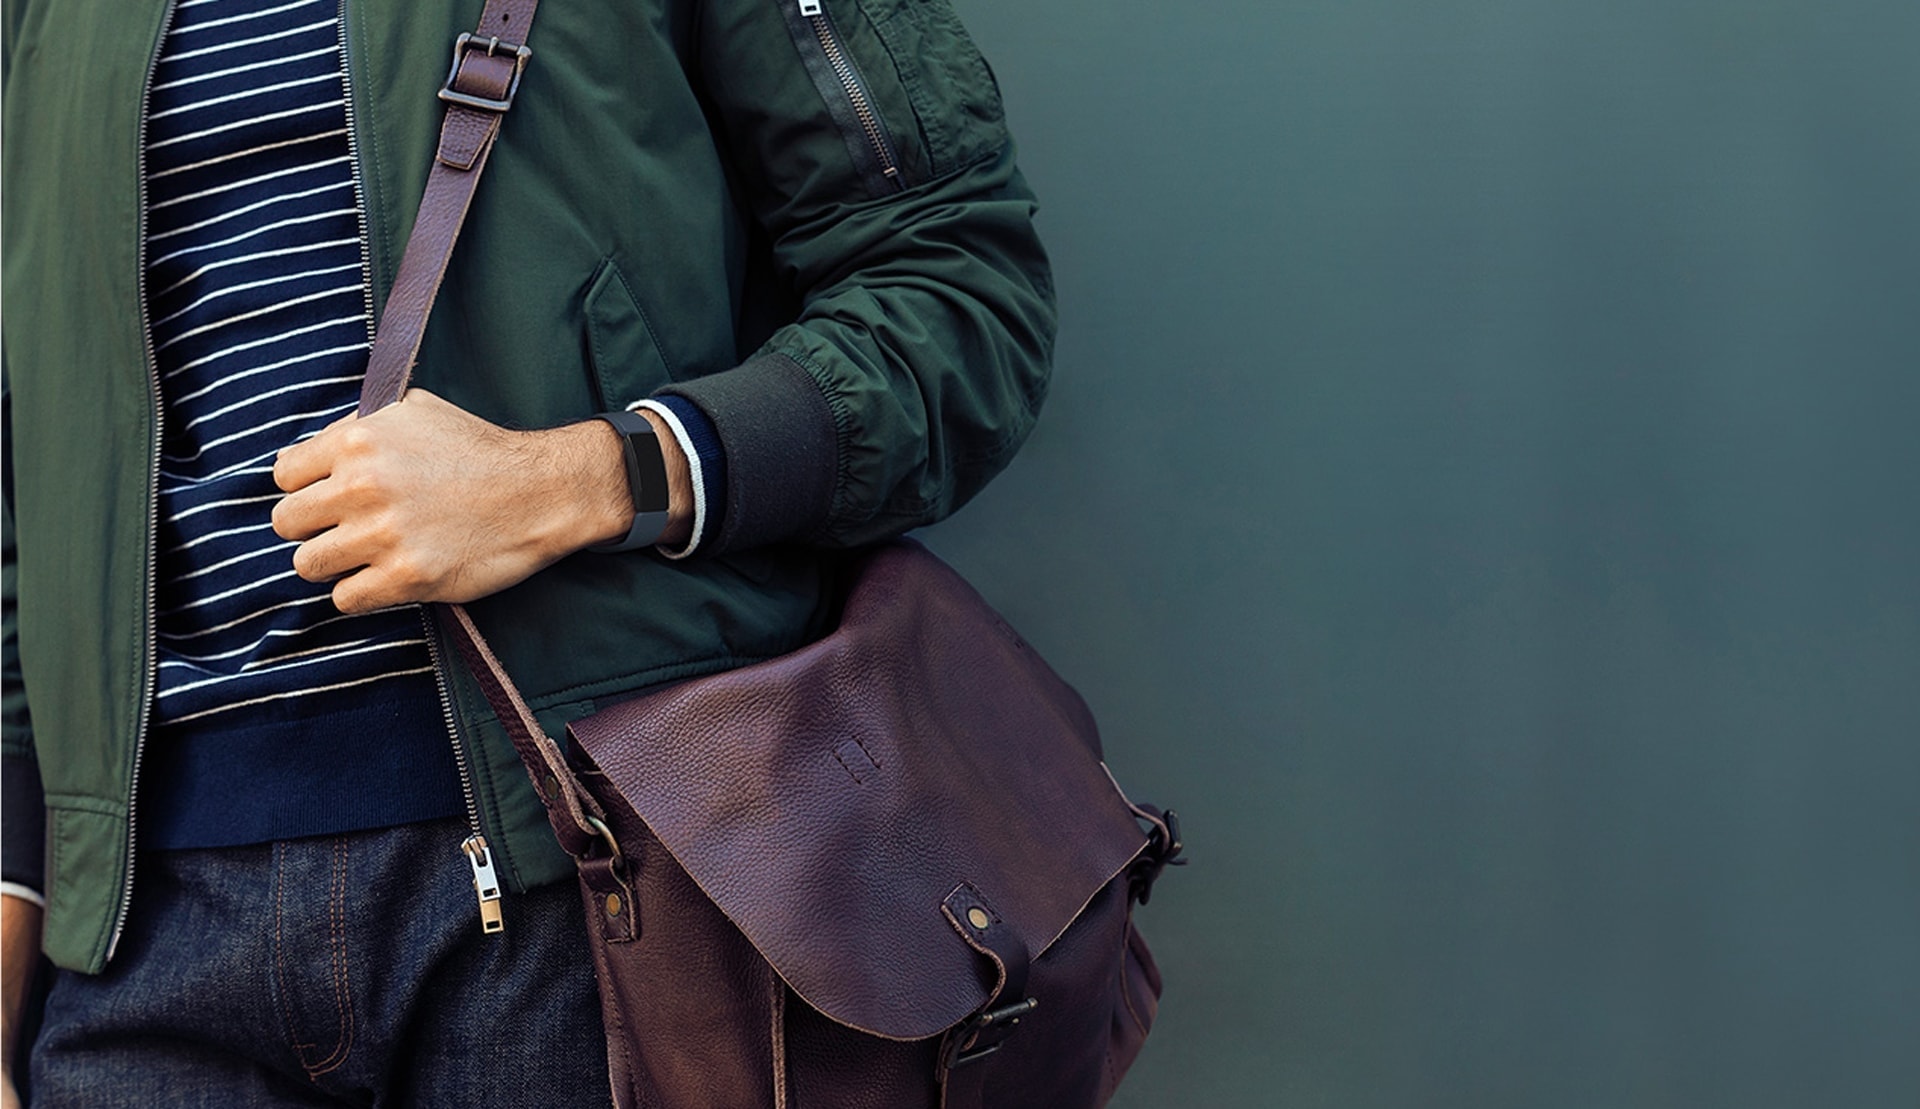 Man with Fitbit Fitness Tracker and leather bag